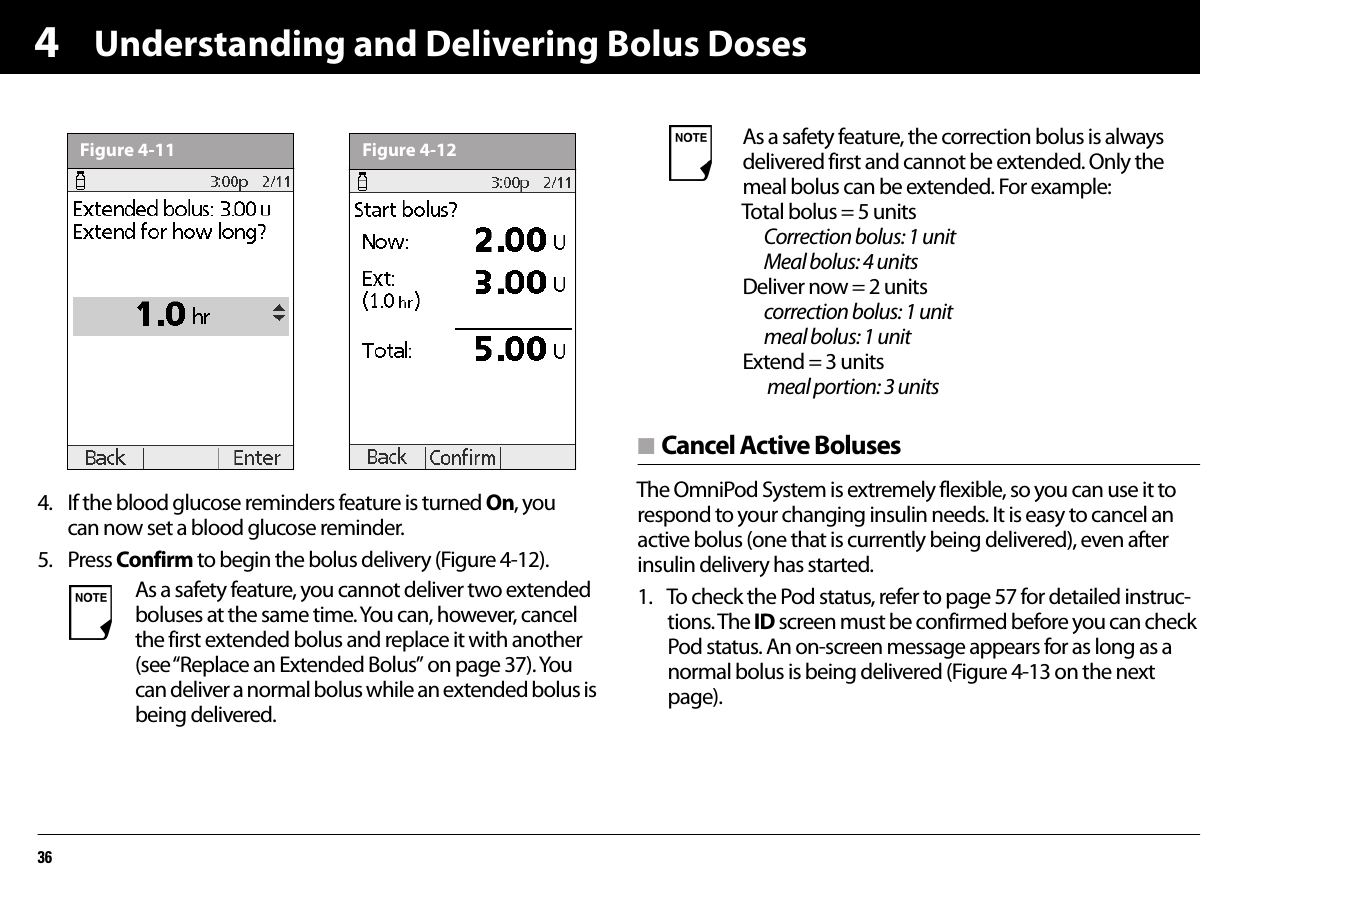 Understanding and Delivering Bolus Doses3644. If the blood glucose reminders feature is turned On, you can now set a blood glucose reminder.5. Press Confirm to begin the bolus delivery (Figure 4-12).n Cancel Active BolusesThe OmniPod System is extremely flexible, so you can use it to respond to your changing insulin needs. It is easy to cancel an active bolus (one that is currently being delivered), even after insulin delivery has started.1. To check the Pod status, refer to page 57 for detailed instruc-tions. The ID screen must be confirmed before you can check Pod status. An on-screen message appears for as long as a normal bolus is being delivered (Figure 4-13 on the next page).  As a safety feature, you cannot deliver two extended boluses at the same time. You can, however, cancel the first extended bolus and replace it with another (see “Replace an Extended Bolus” on page 37). You can deliver a normal bolus while an extended bolus is being delivered.Figure 4-11Figure 4-12 As a safety feature, the correction bolus is always delivered first and cannot be extended. Only the meal bolus can be extended. For example:Total bolus = 5 units    Correction bolus: 1 unit    Meal bolus: 4 unitsDeliver now = 2 units  correction bolus: 1 unit    meal bolus: 1 unitExtend = 3 units   meal portion: 3 units